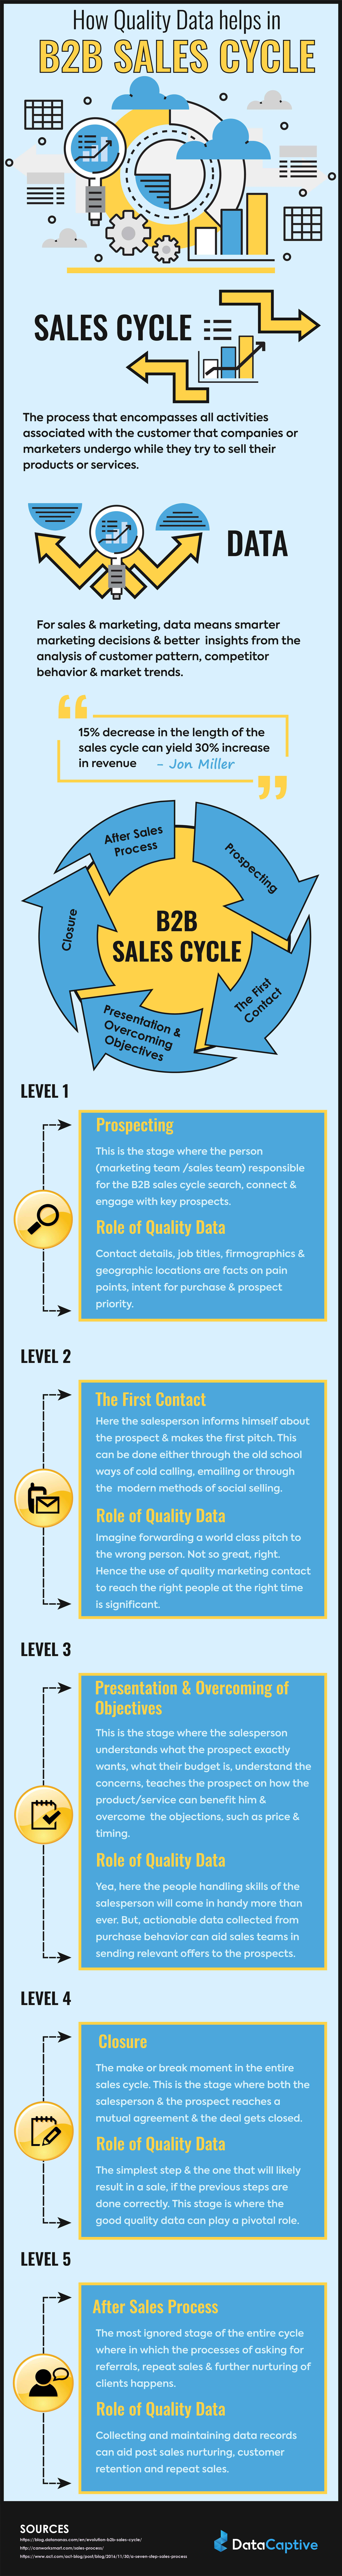 quality Data helps in B2B sales cycle